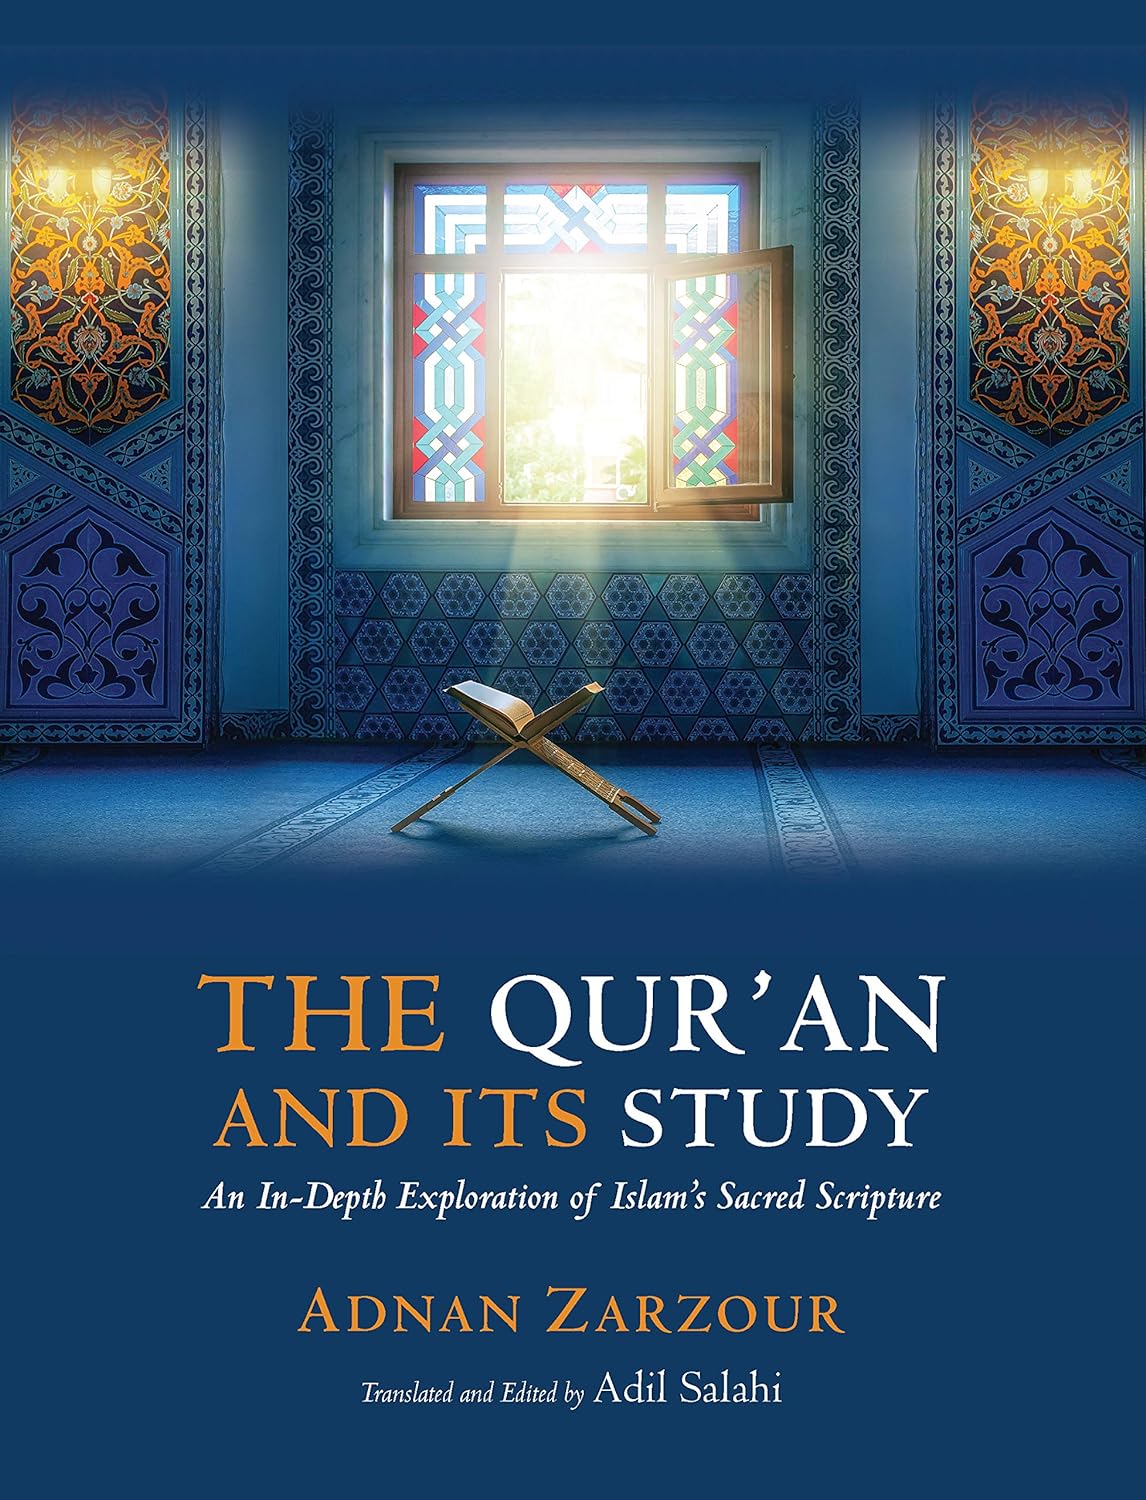 The Qur'an and Its Study (An In Depth Exploration of Islam's Sacred Scripture)